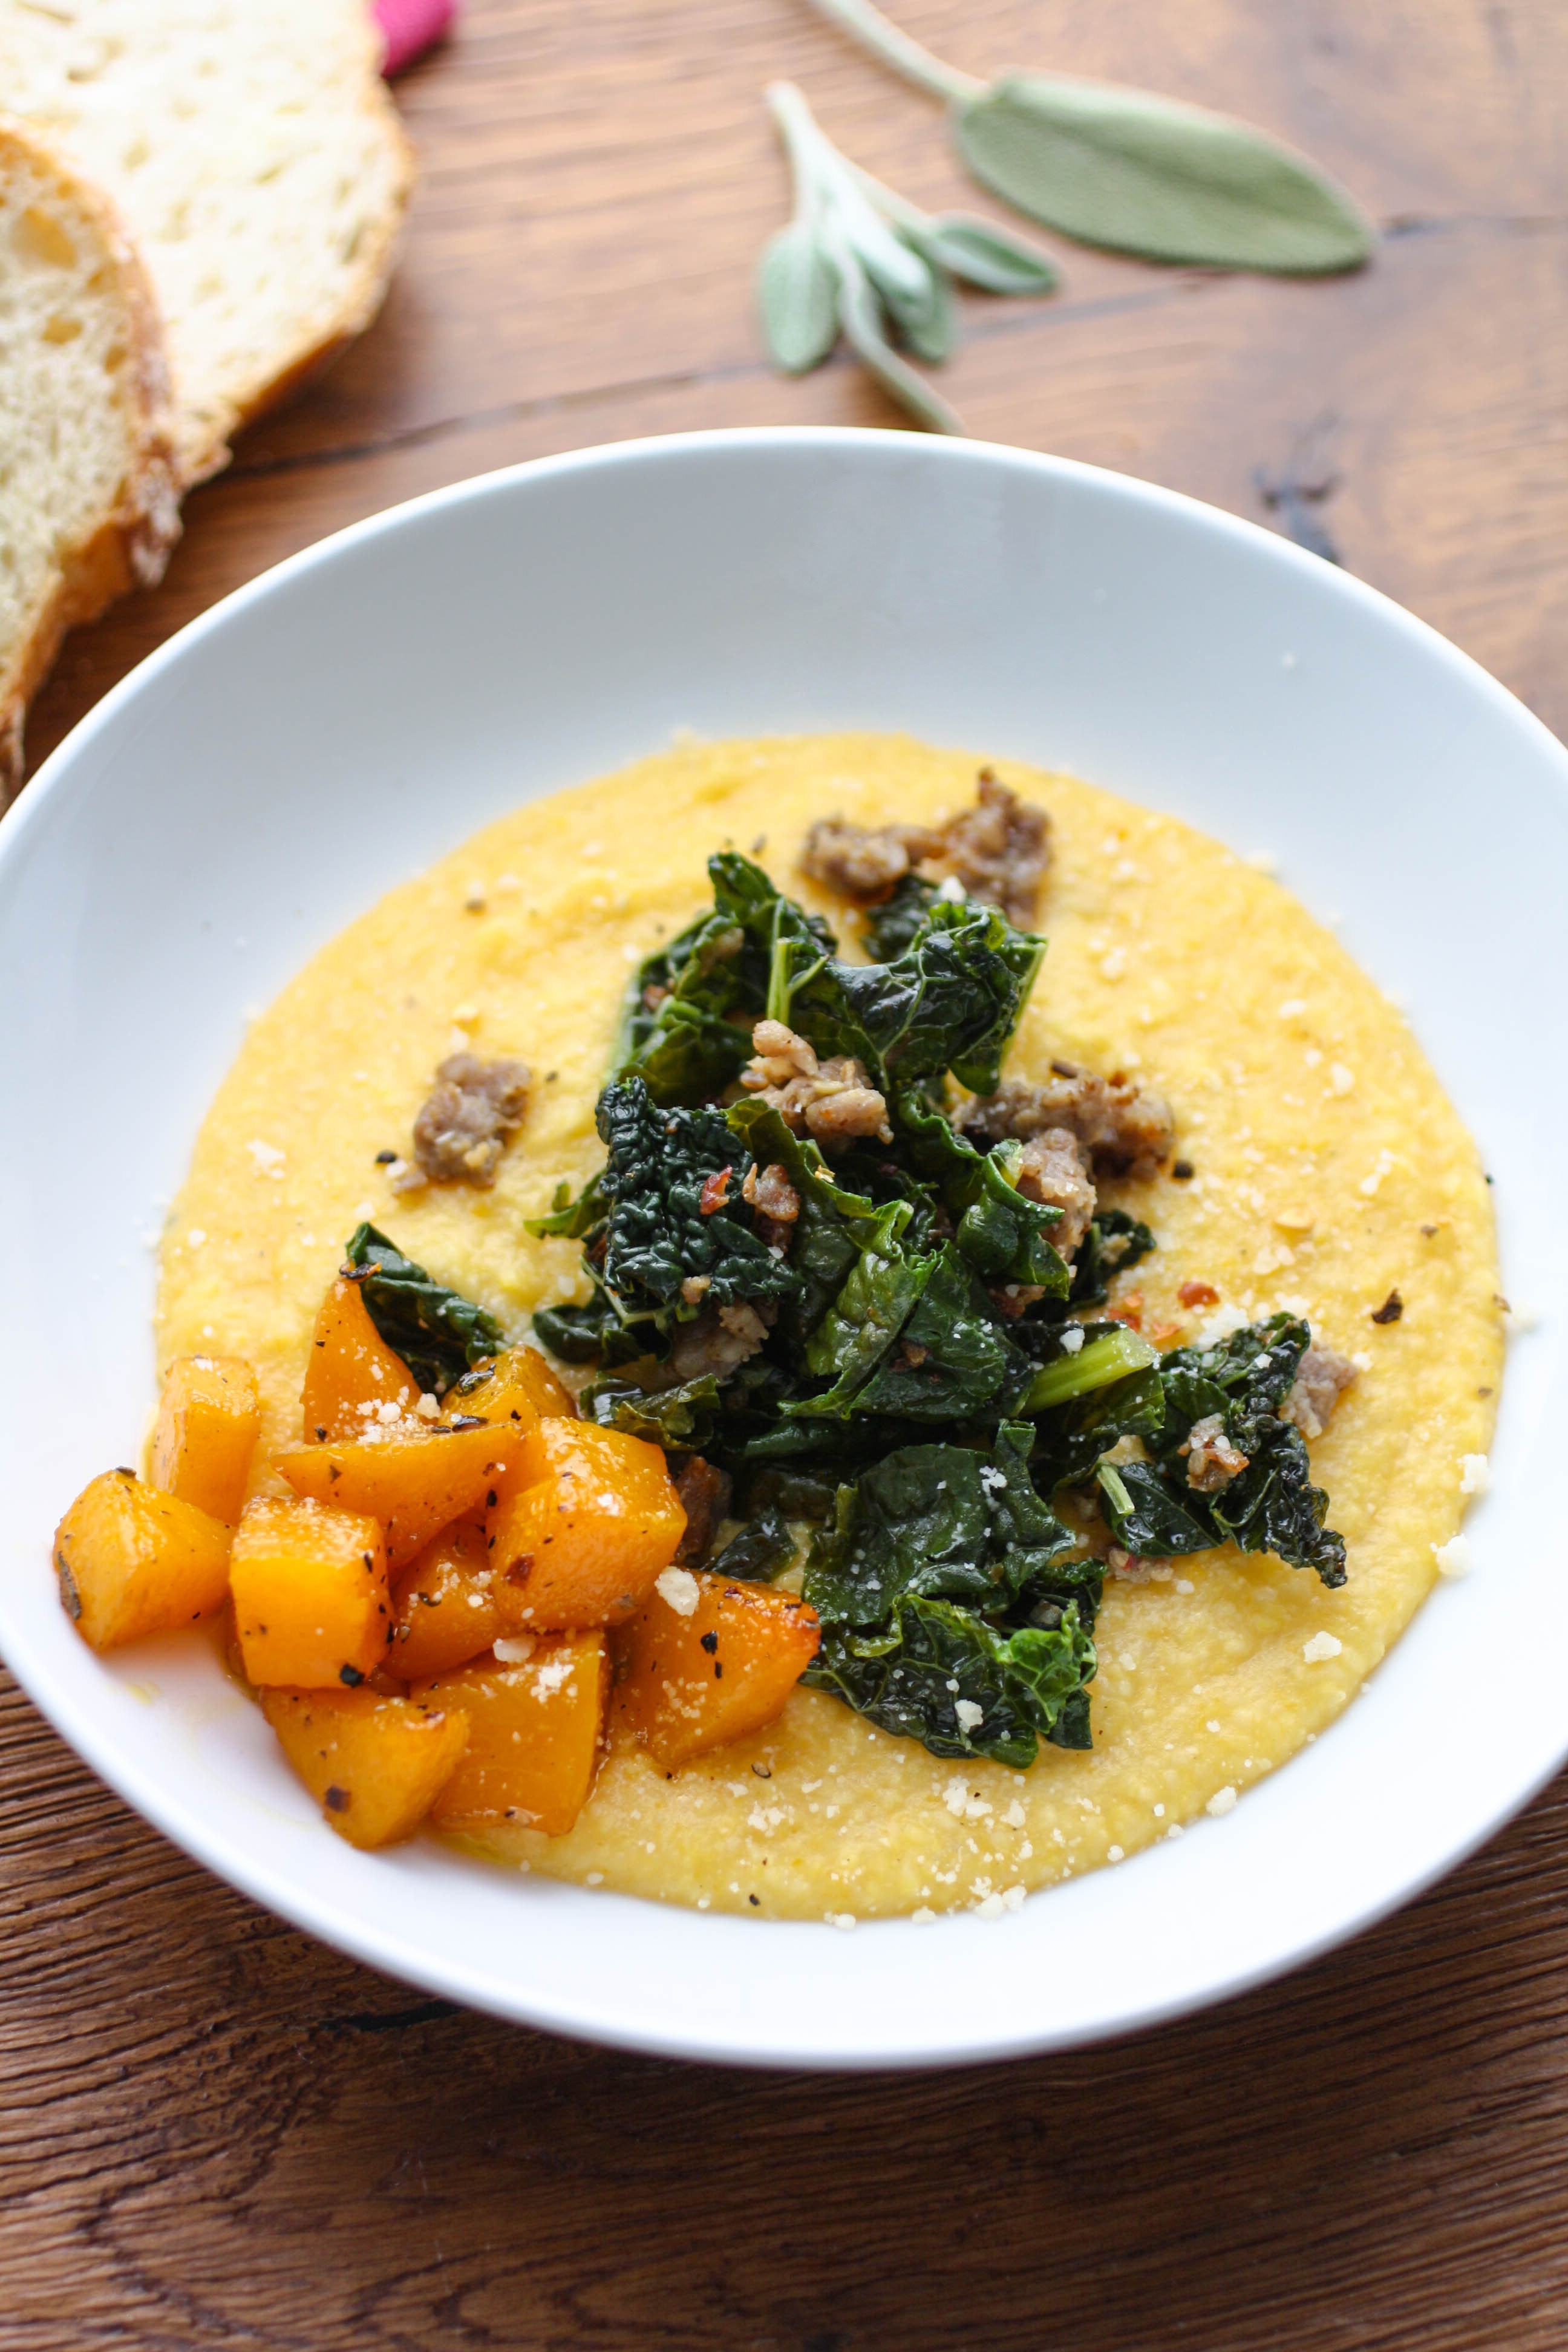 Butternut Squash Grits with Sausage and Kale is a comforting and delicious dish. You'll enjoy serving this grits dish on a chilly night.